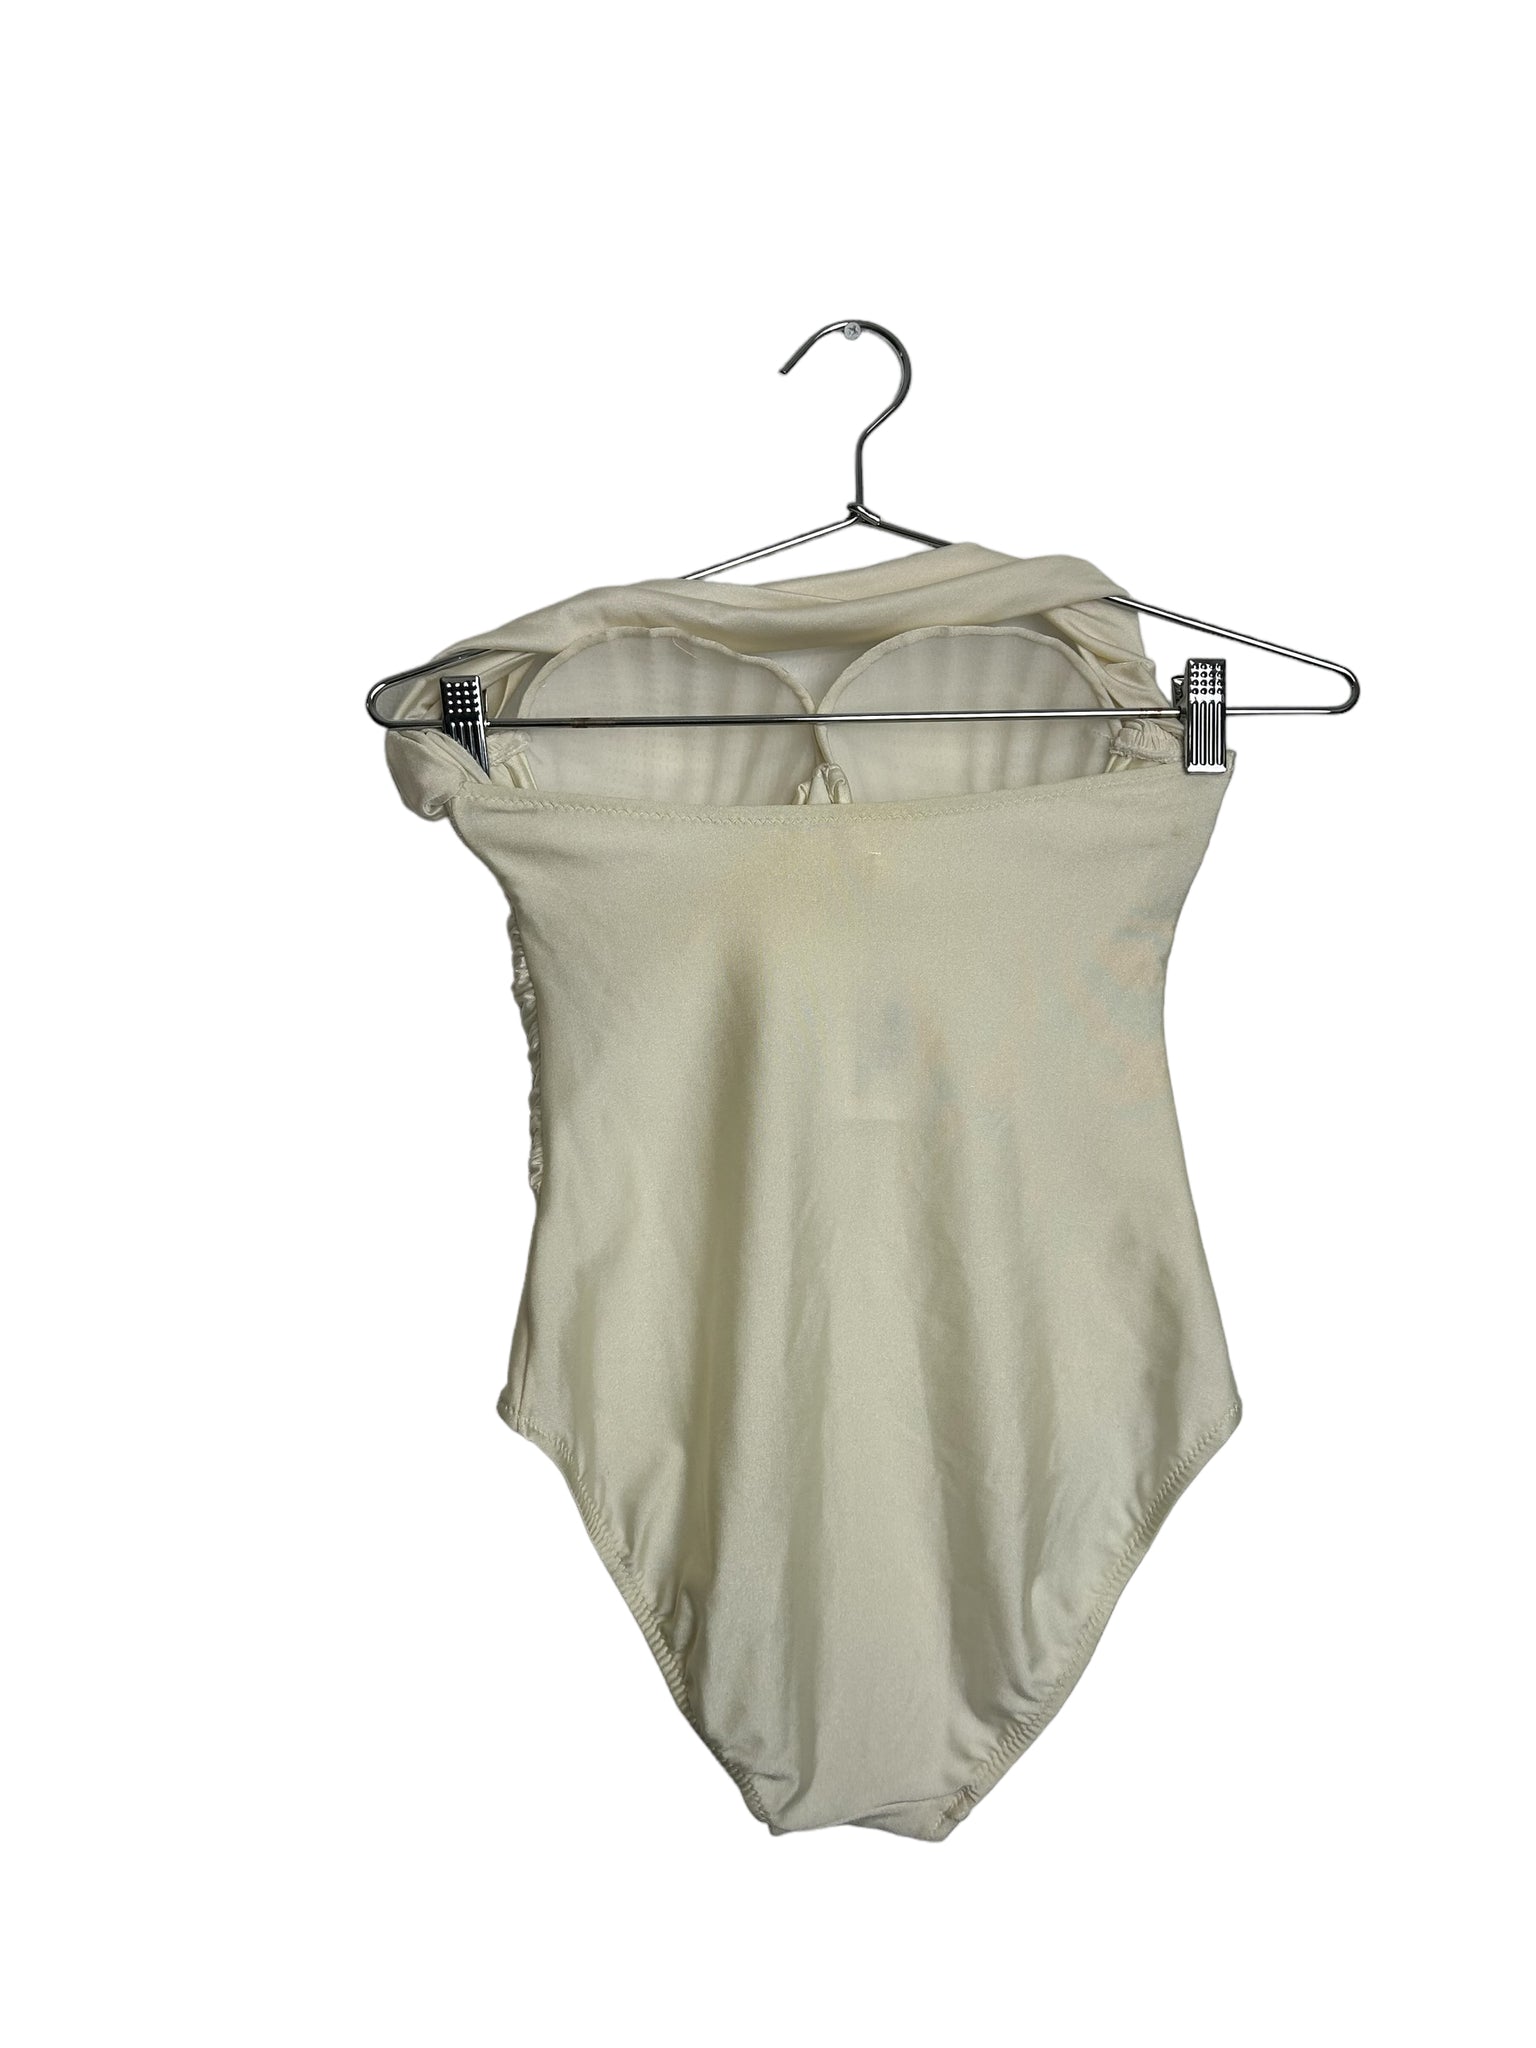 Cupped Cream Bathing Suit